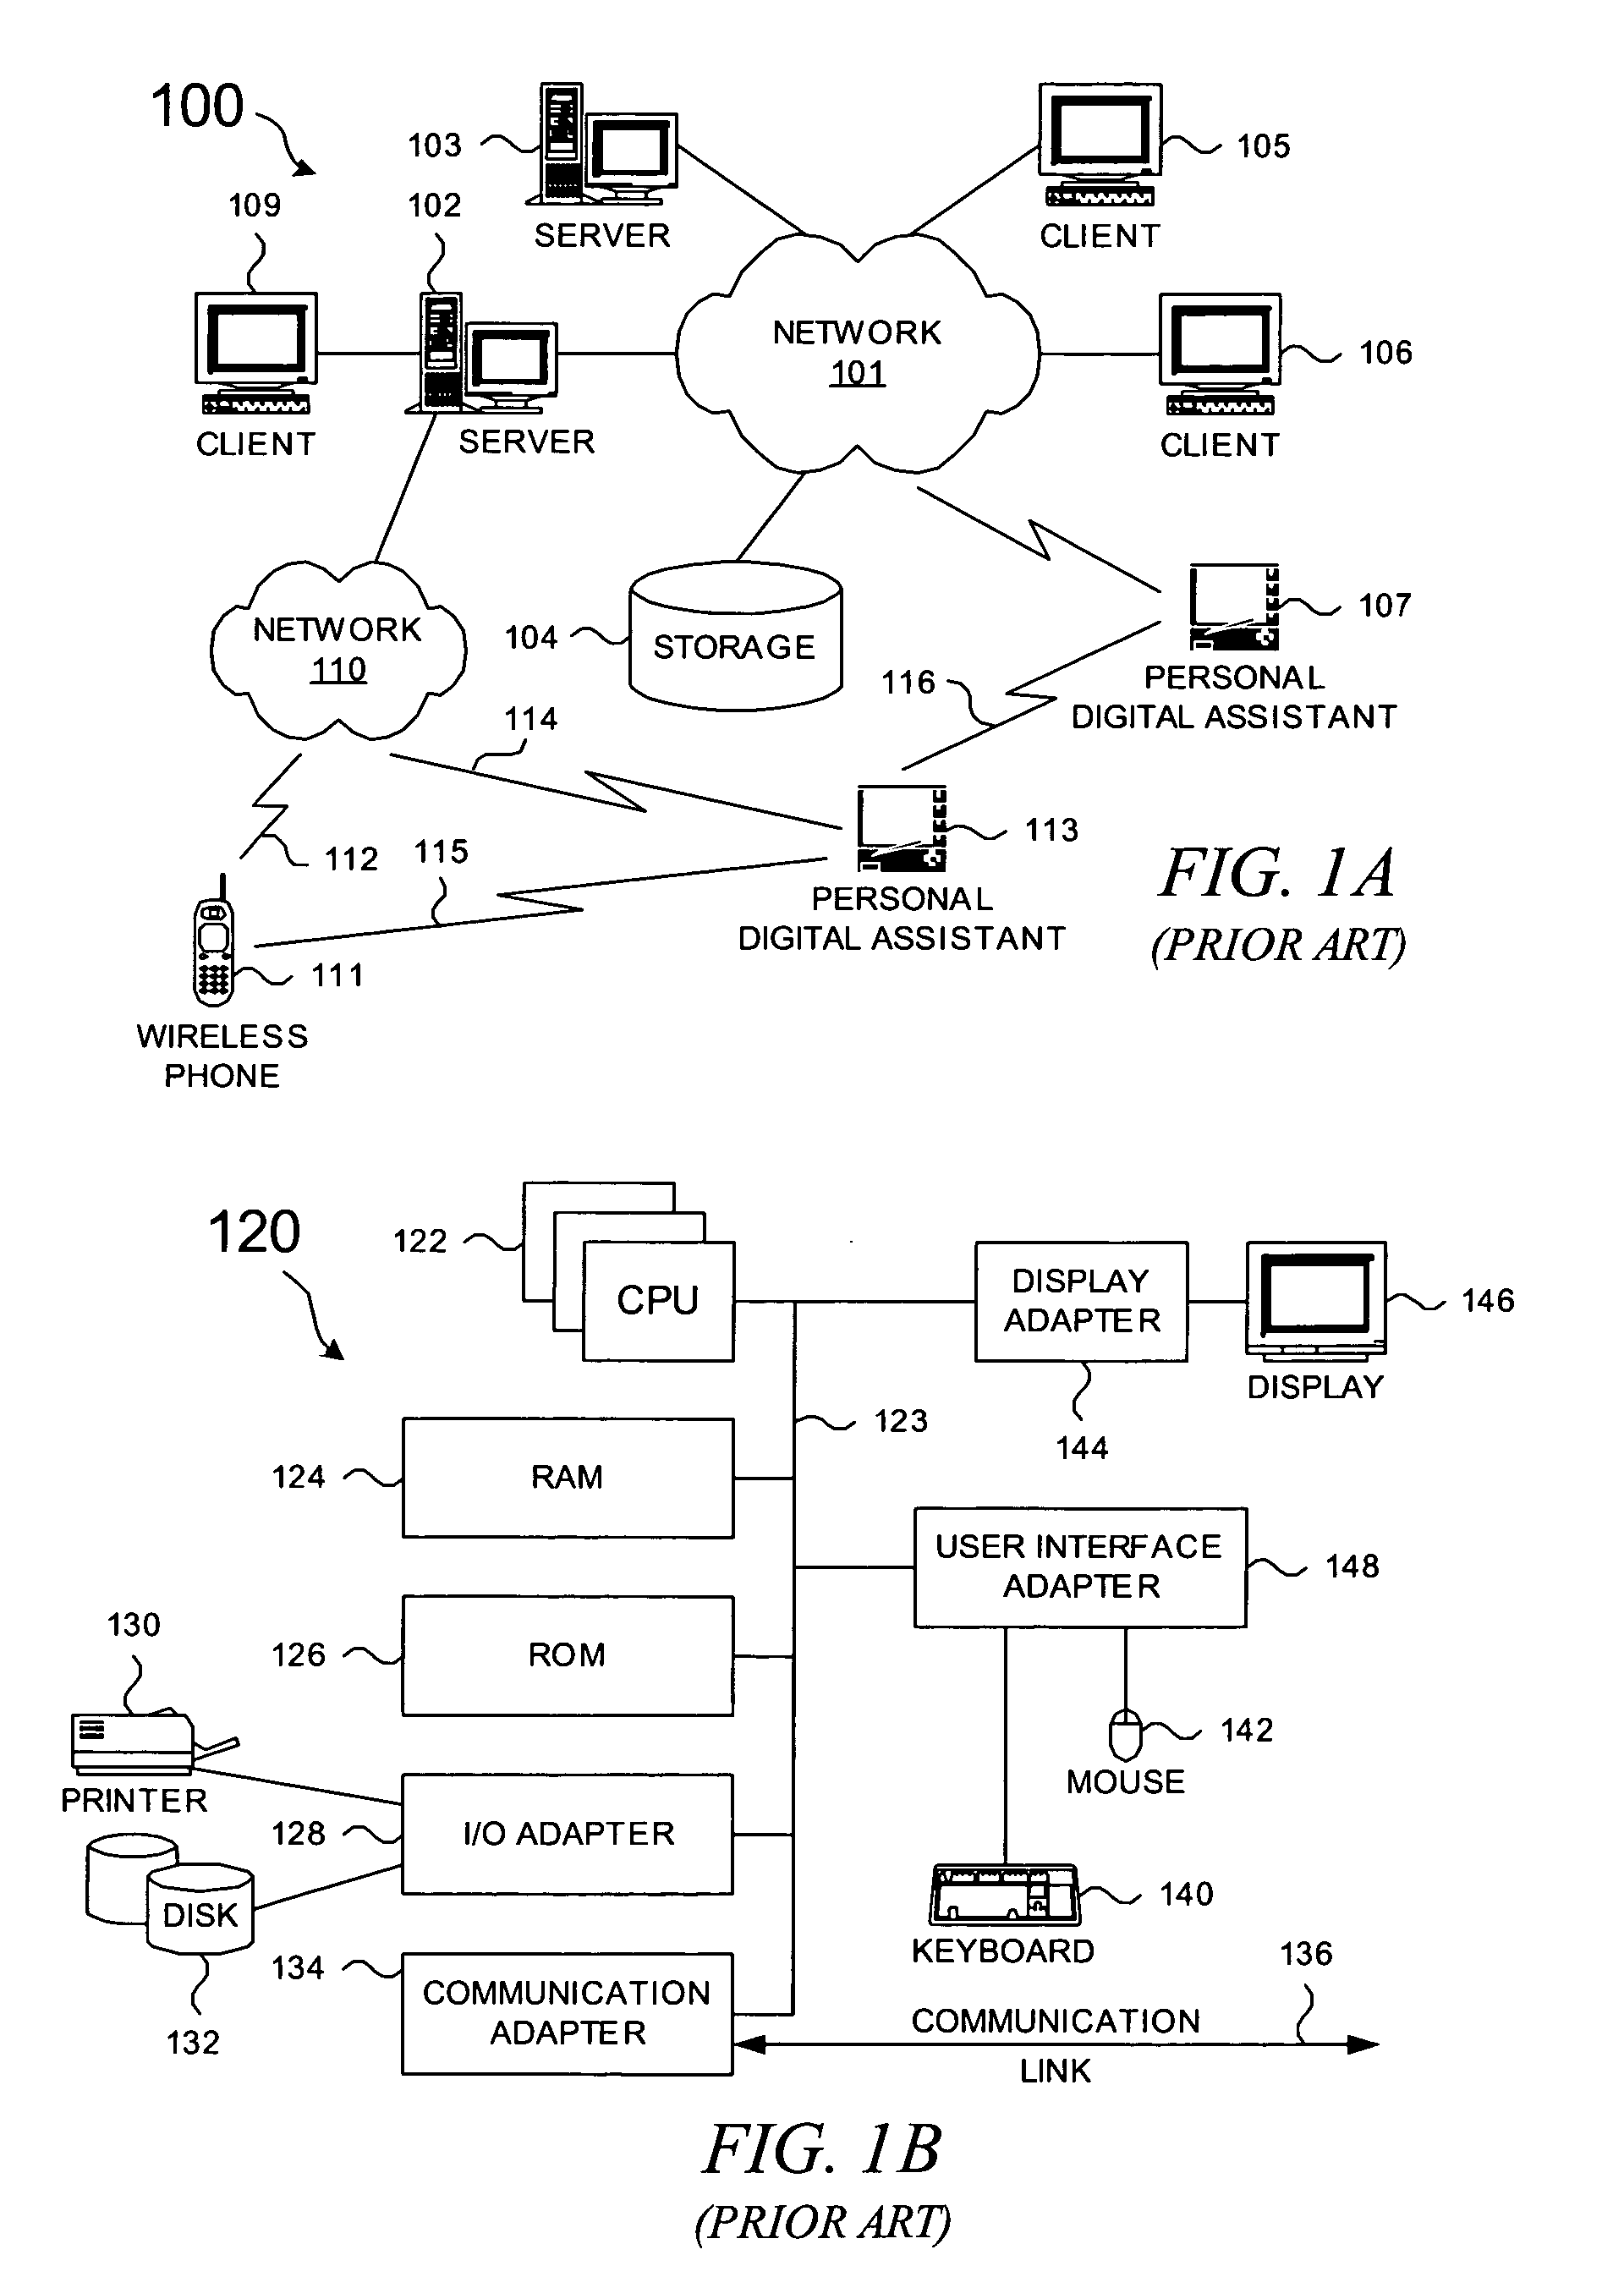 Method and system for authorizing a restricted callable status in an instant messaging system